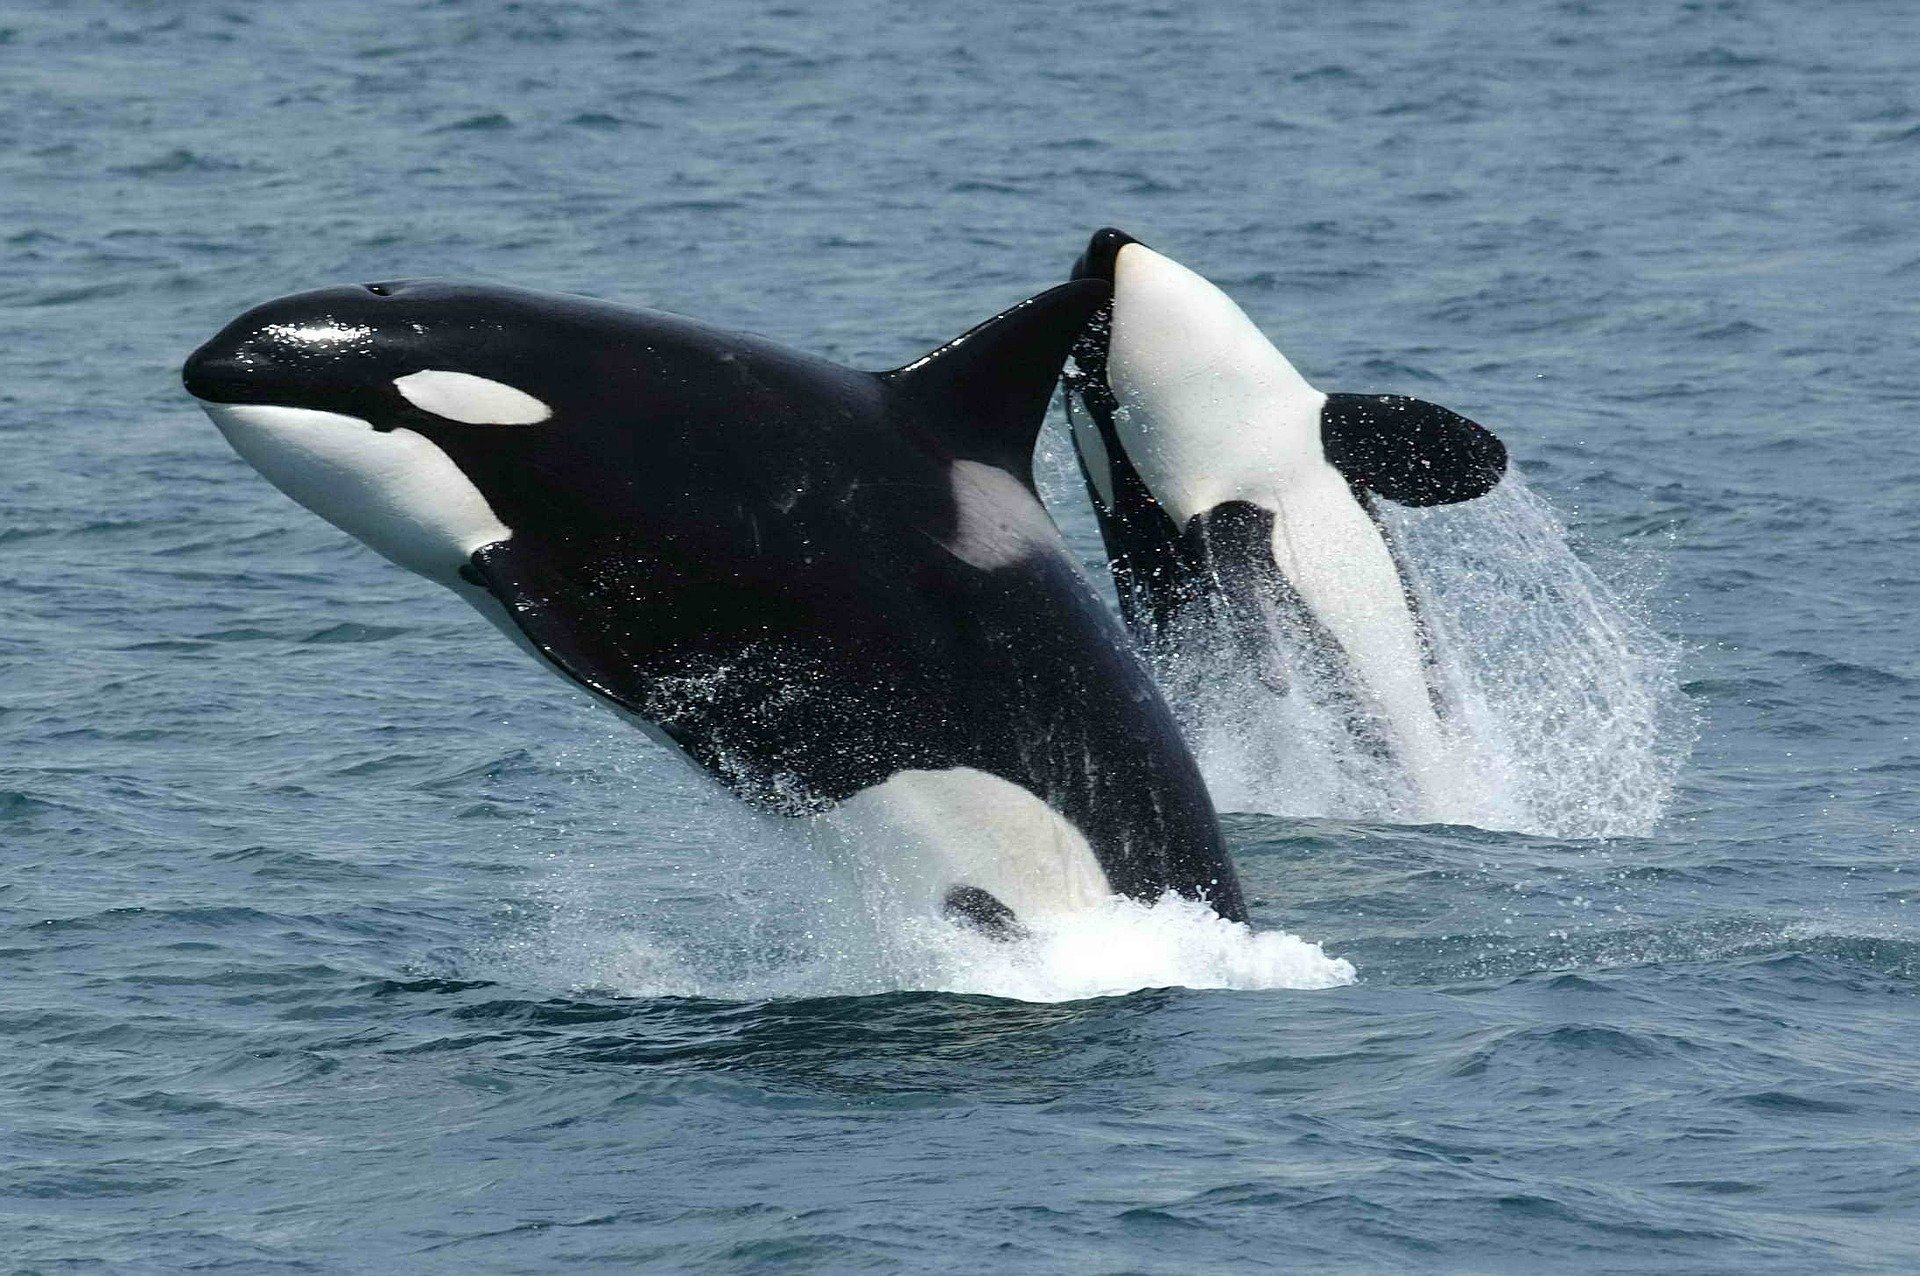 Washington State man who captured Tokitae says he has ‘no regrets’ after orca’s death